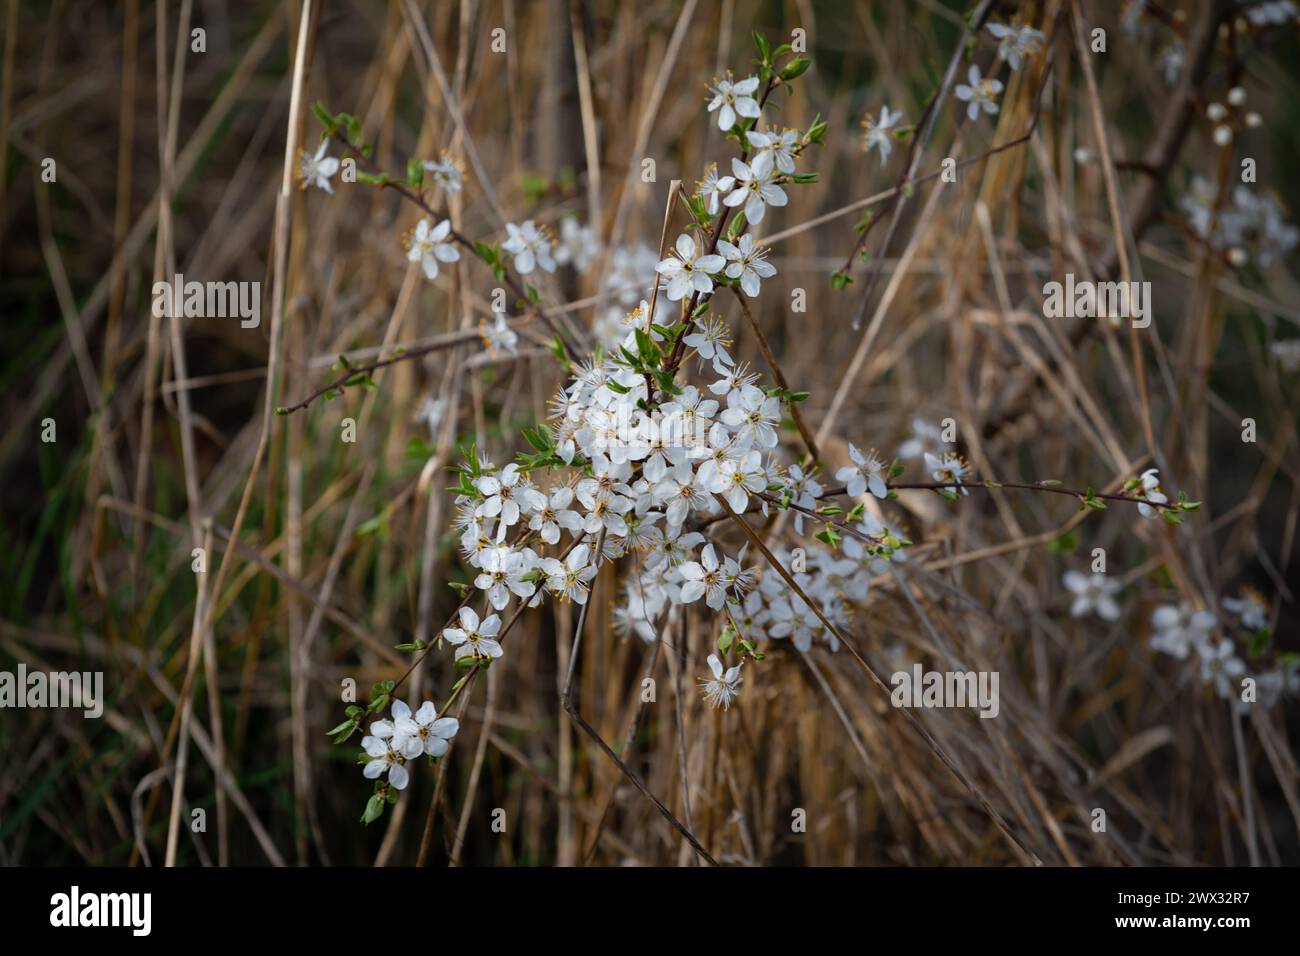 The small white flowers stand out against a background of dry brown grasses. Stock Photo